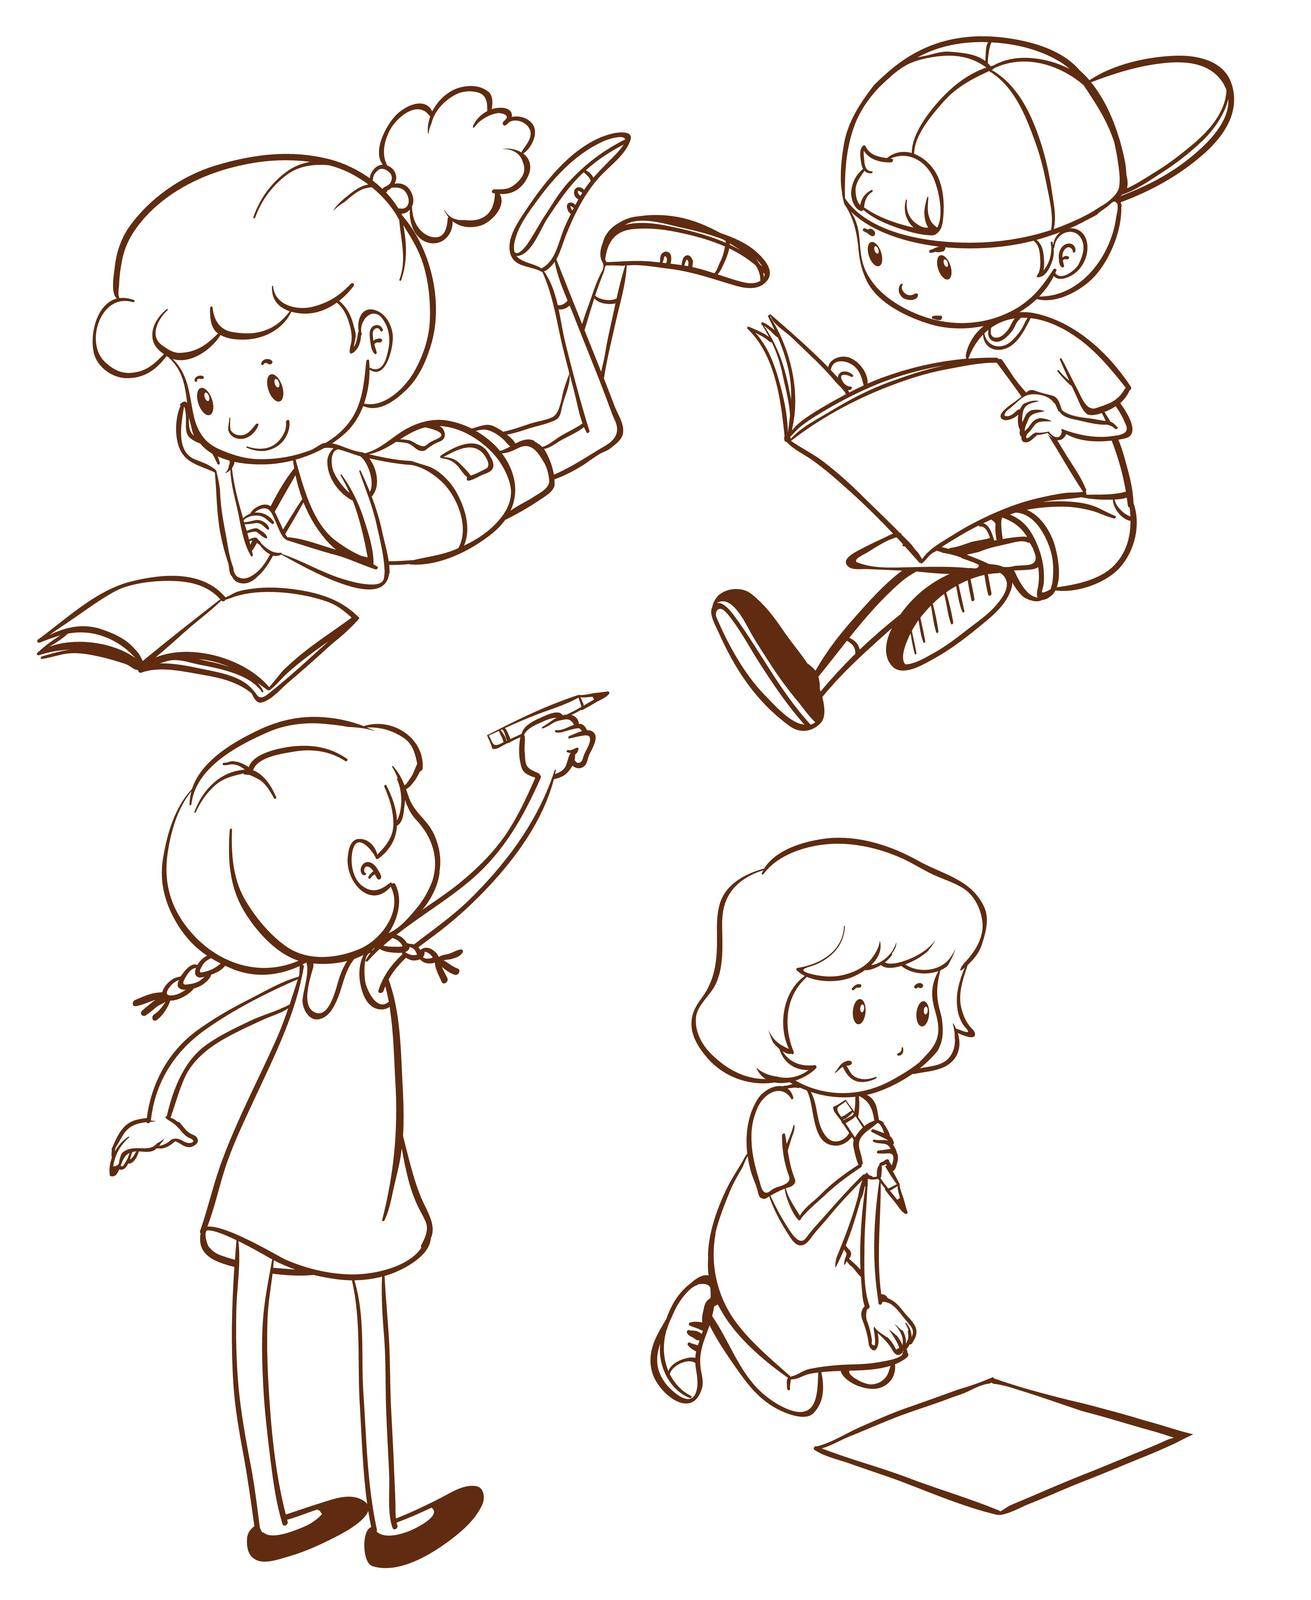 Illustration of children reading and writing